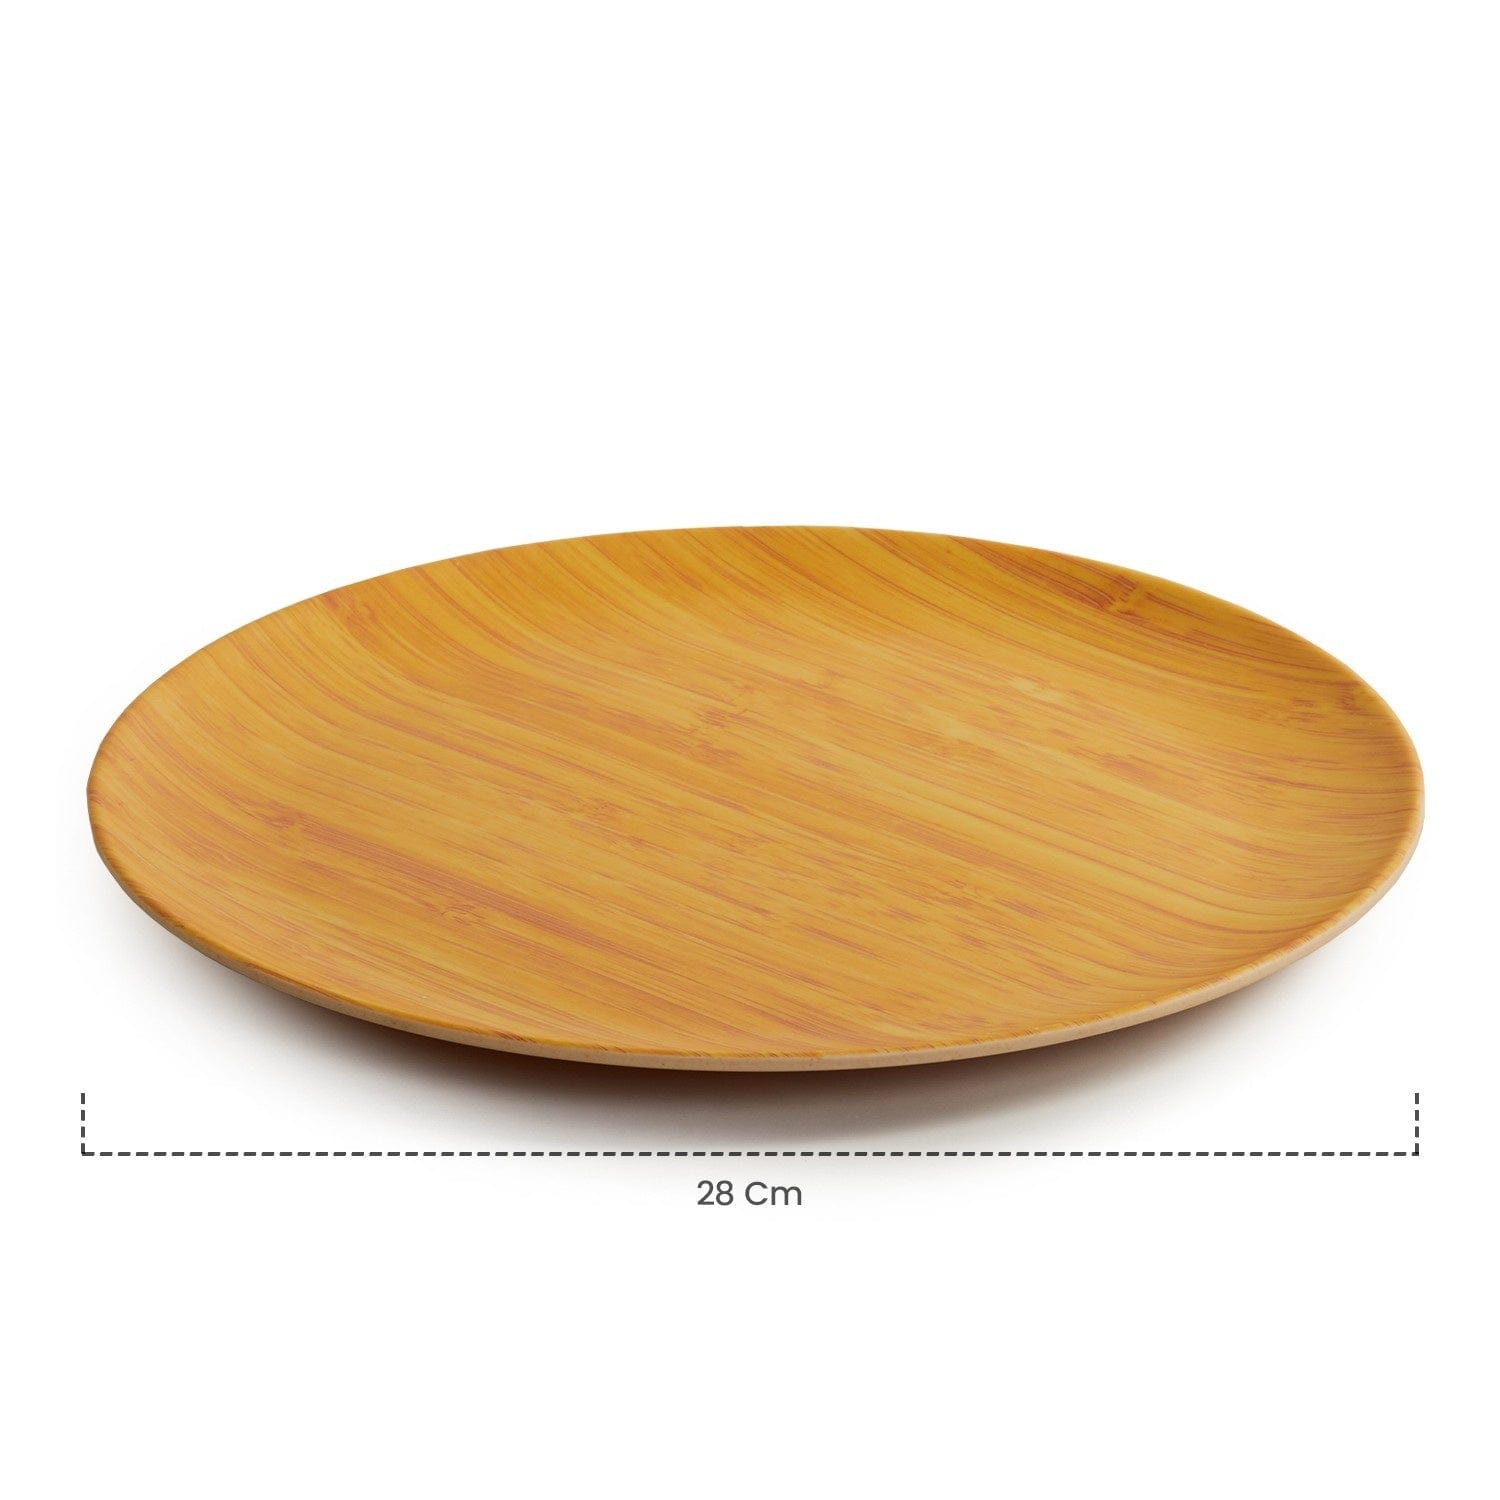 Red Butler Dinner Plates Bamboo Fibre Plate 11 inches | 6pcs Set | Wooden Design BP11A4 Daily-Use Eco-Friendly Bamboo Fiber Dinner Plate Stylish & Sustainable Redbutler